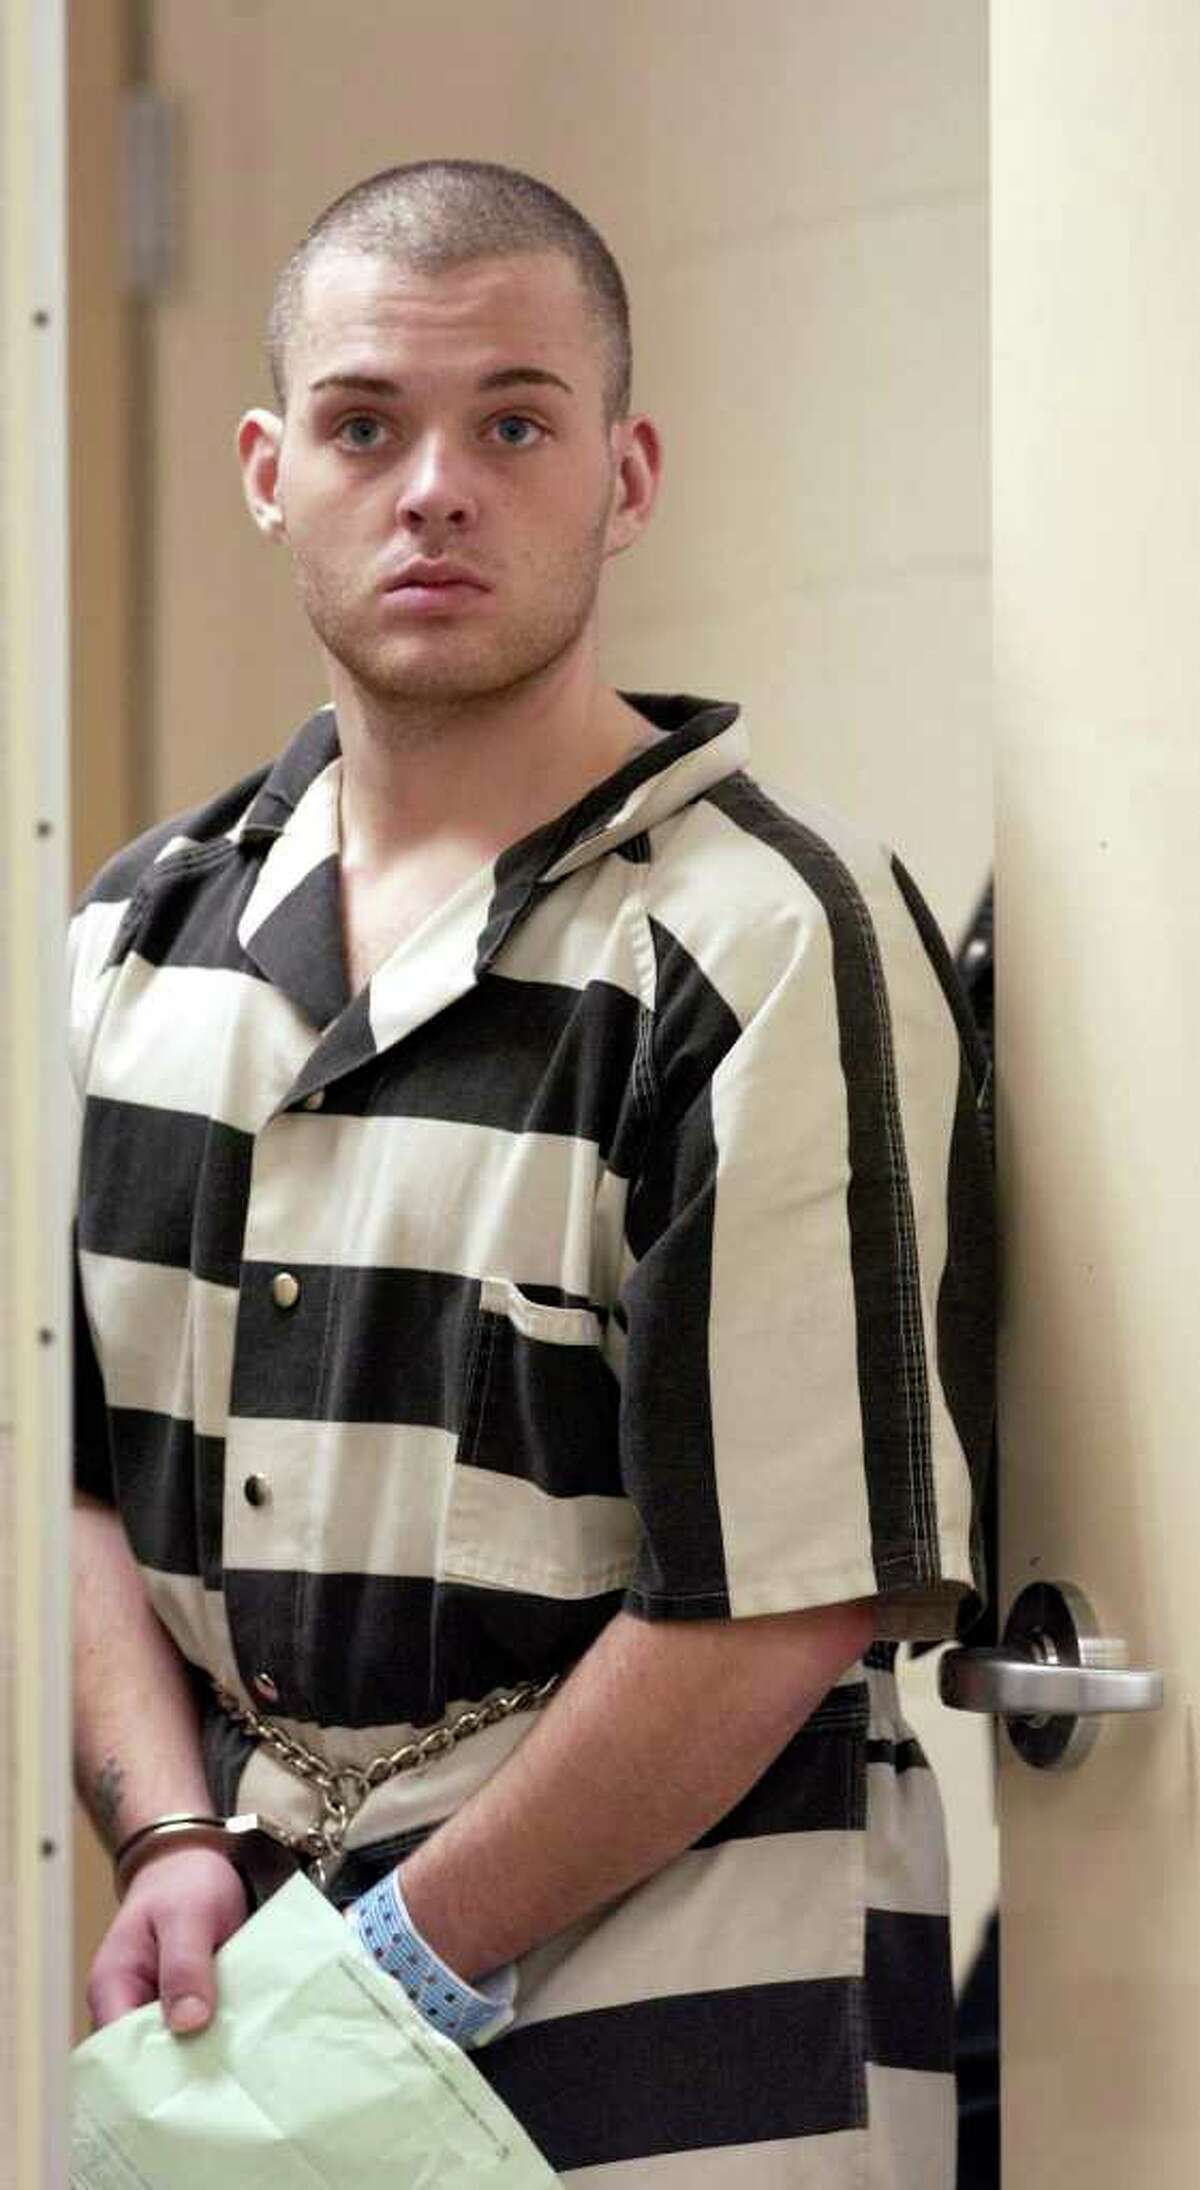 Christopher DiMeo, 23, is led into court in Mays Landing, N.J., Monday, Feb. 7, 2005. DiMeo, 23, a suspect in two fatal jewelry store robberies agreed to return to New York to face charges along with the girlfriend who allegedly was his accomplice. DiMeo, who was arraigned as a fugitive and sought for a parole violation, will be charged with murder in the Dec. 21 slaying of Renison, according to Detective Sgt. Herbert Daub of the Nassau County Police Department. (AP Photo/Mary Godleski)